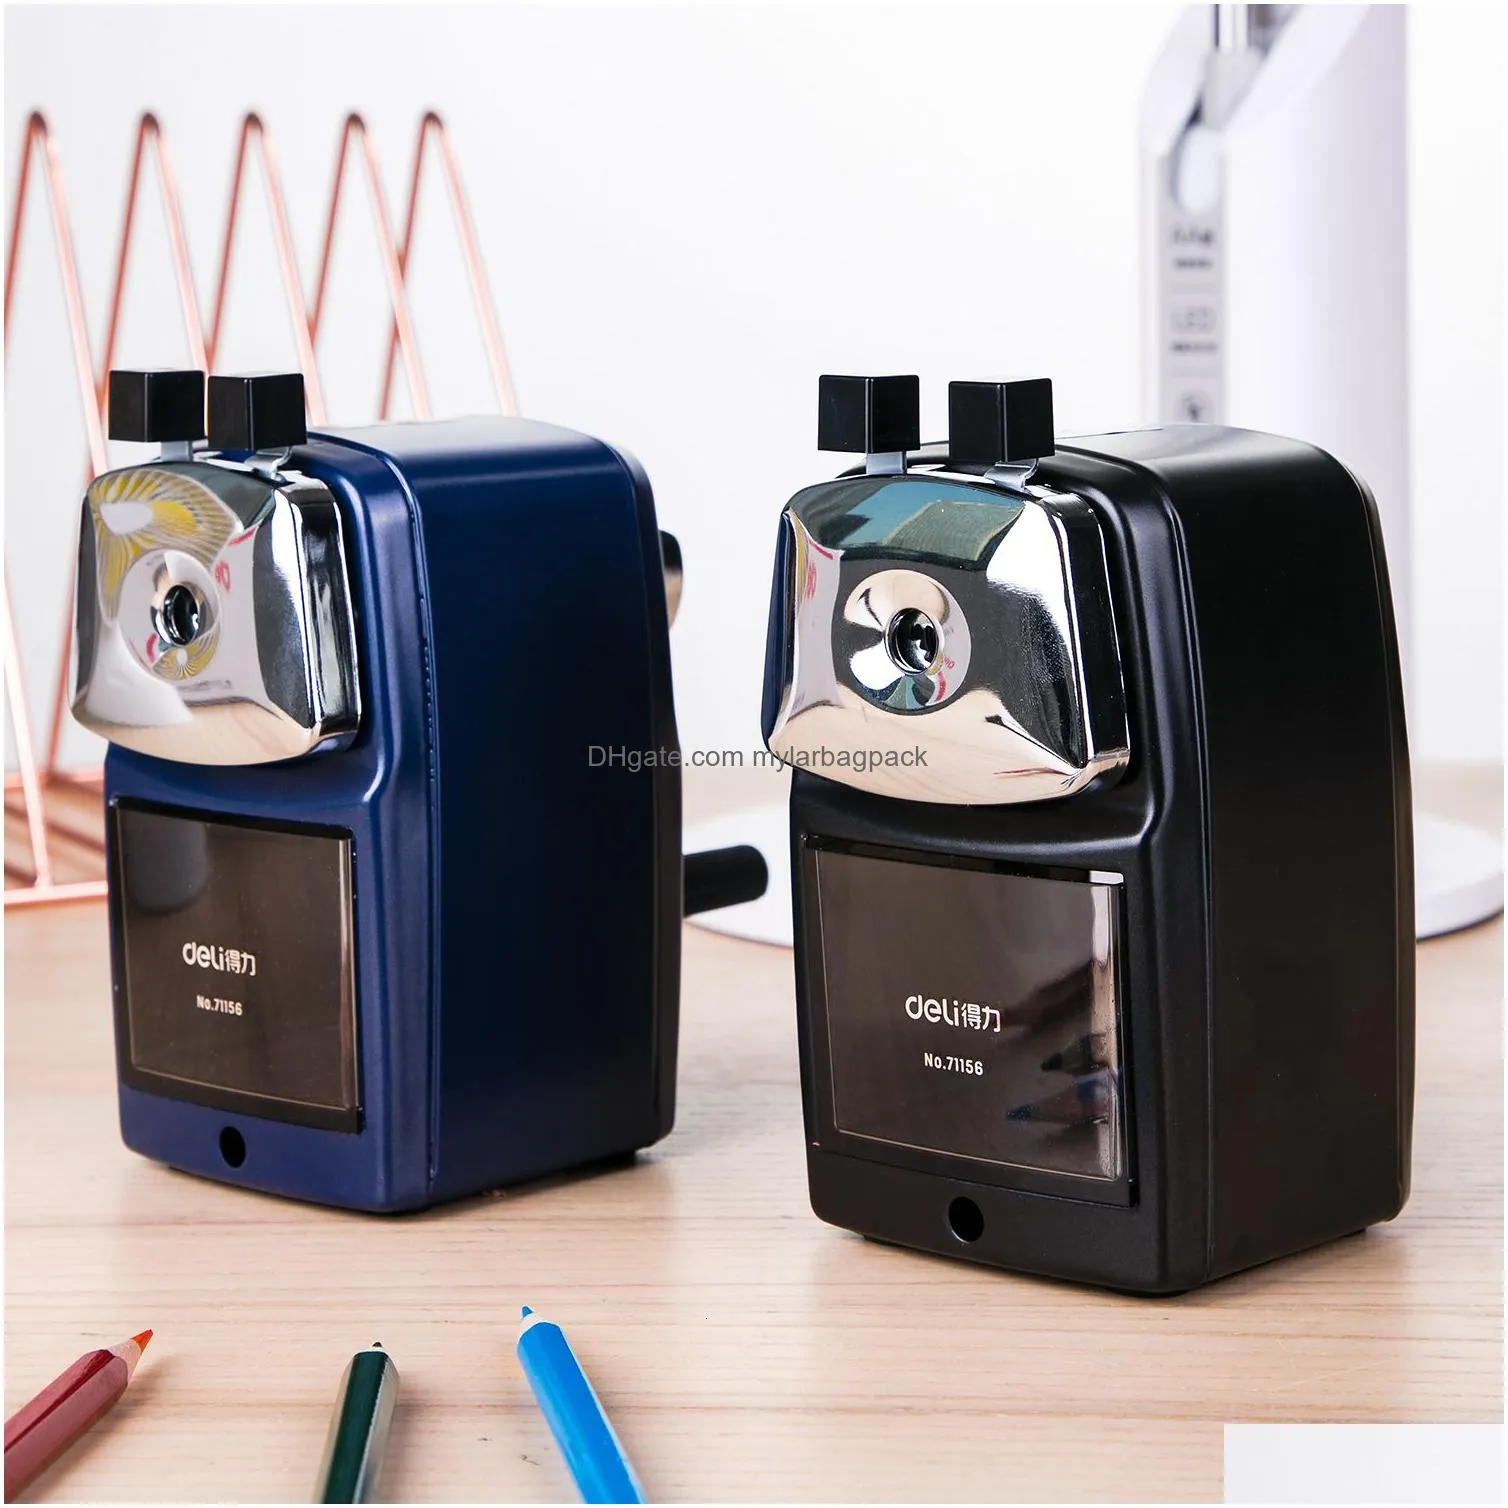 wholesale pencil sharpeners deli hand crank pencil sharpner metal construction tip size adjustable sharpeners for school coloered pencils office staitionery